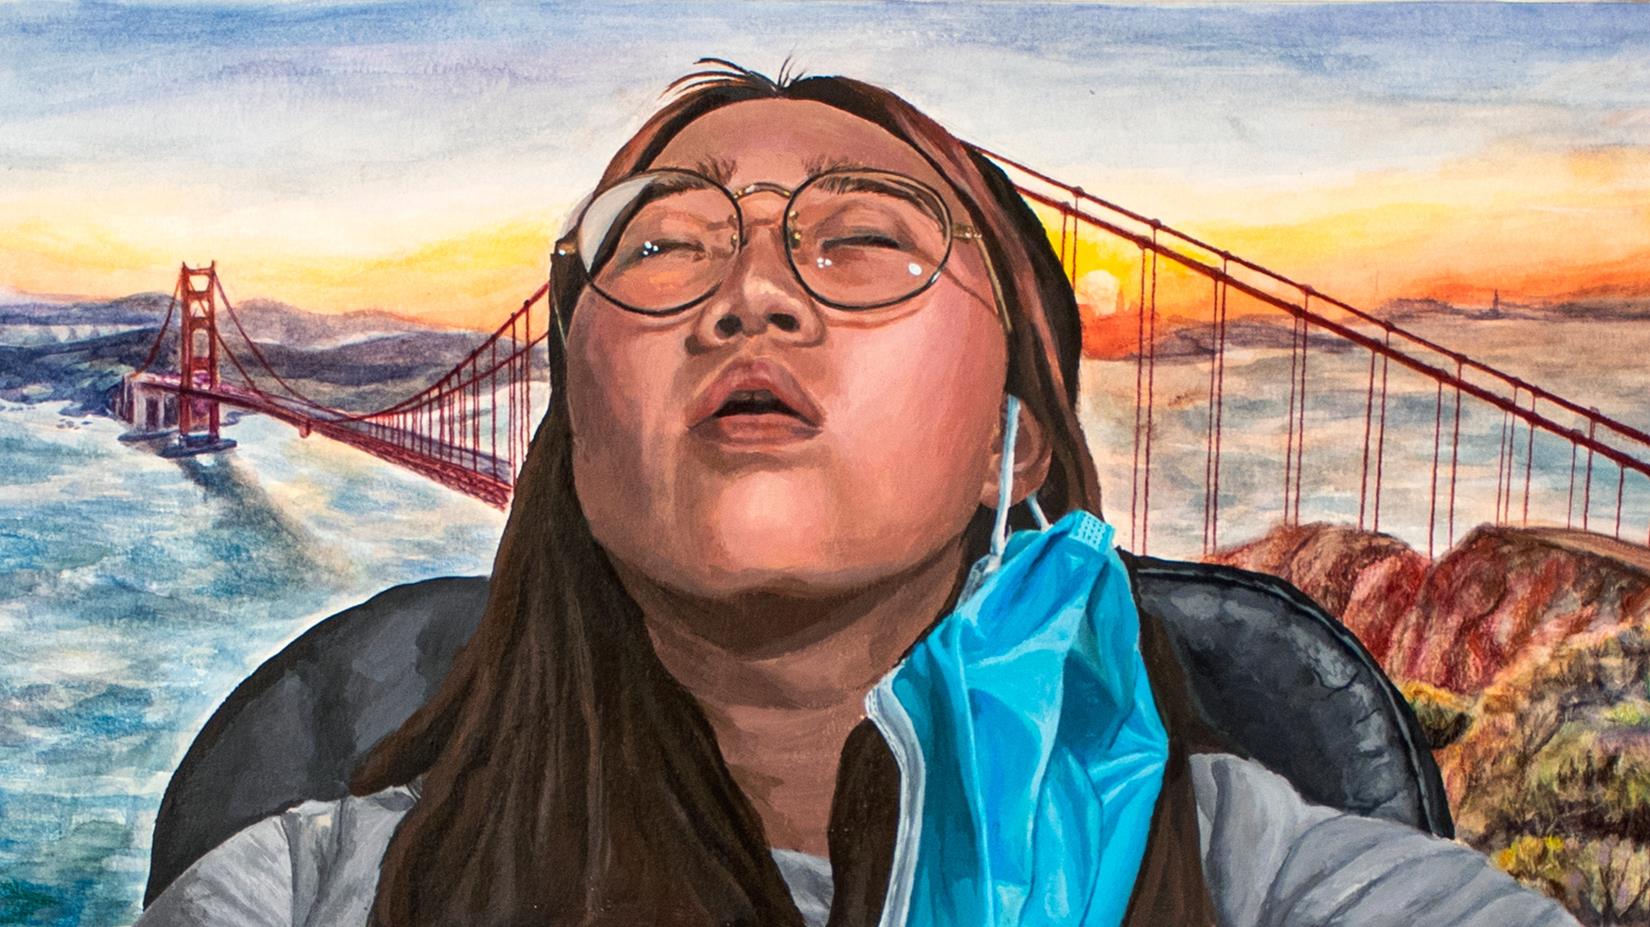 a girl with eyes closed and head tilted back, a face mask hanging from her ear. She appears to be sitting in an office chair dreaming, a scene of the Golden Gate Bridge is behind her